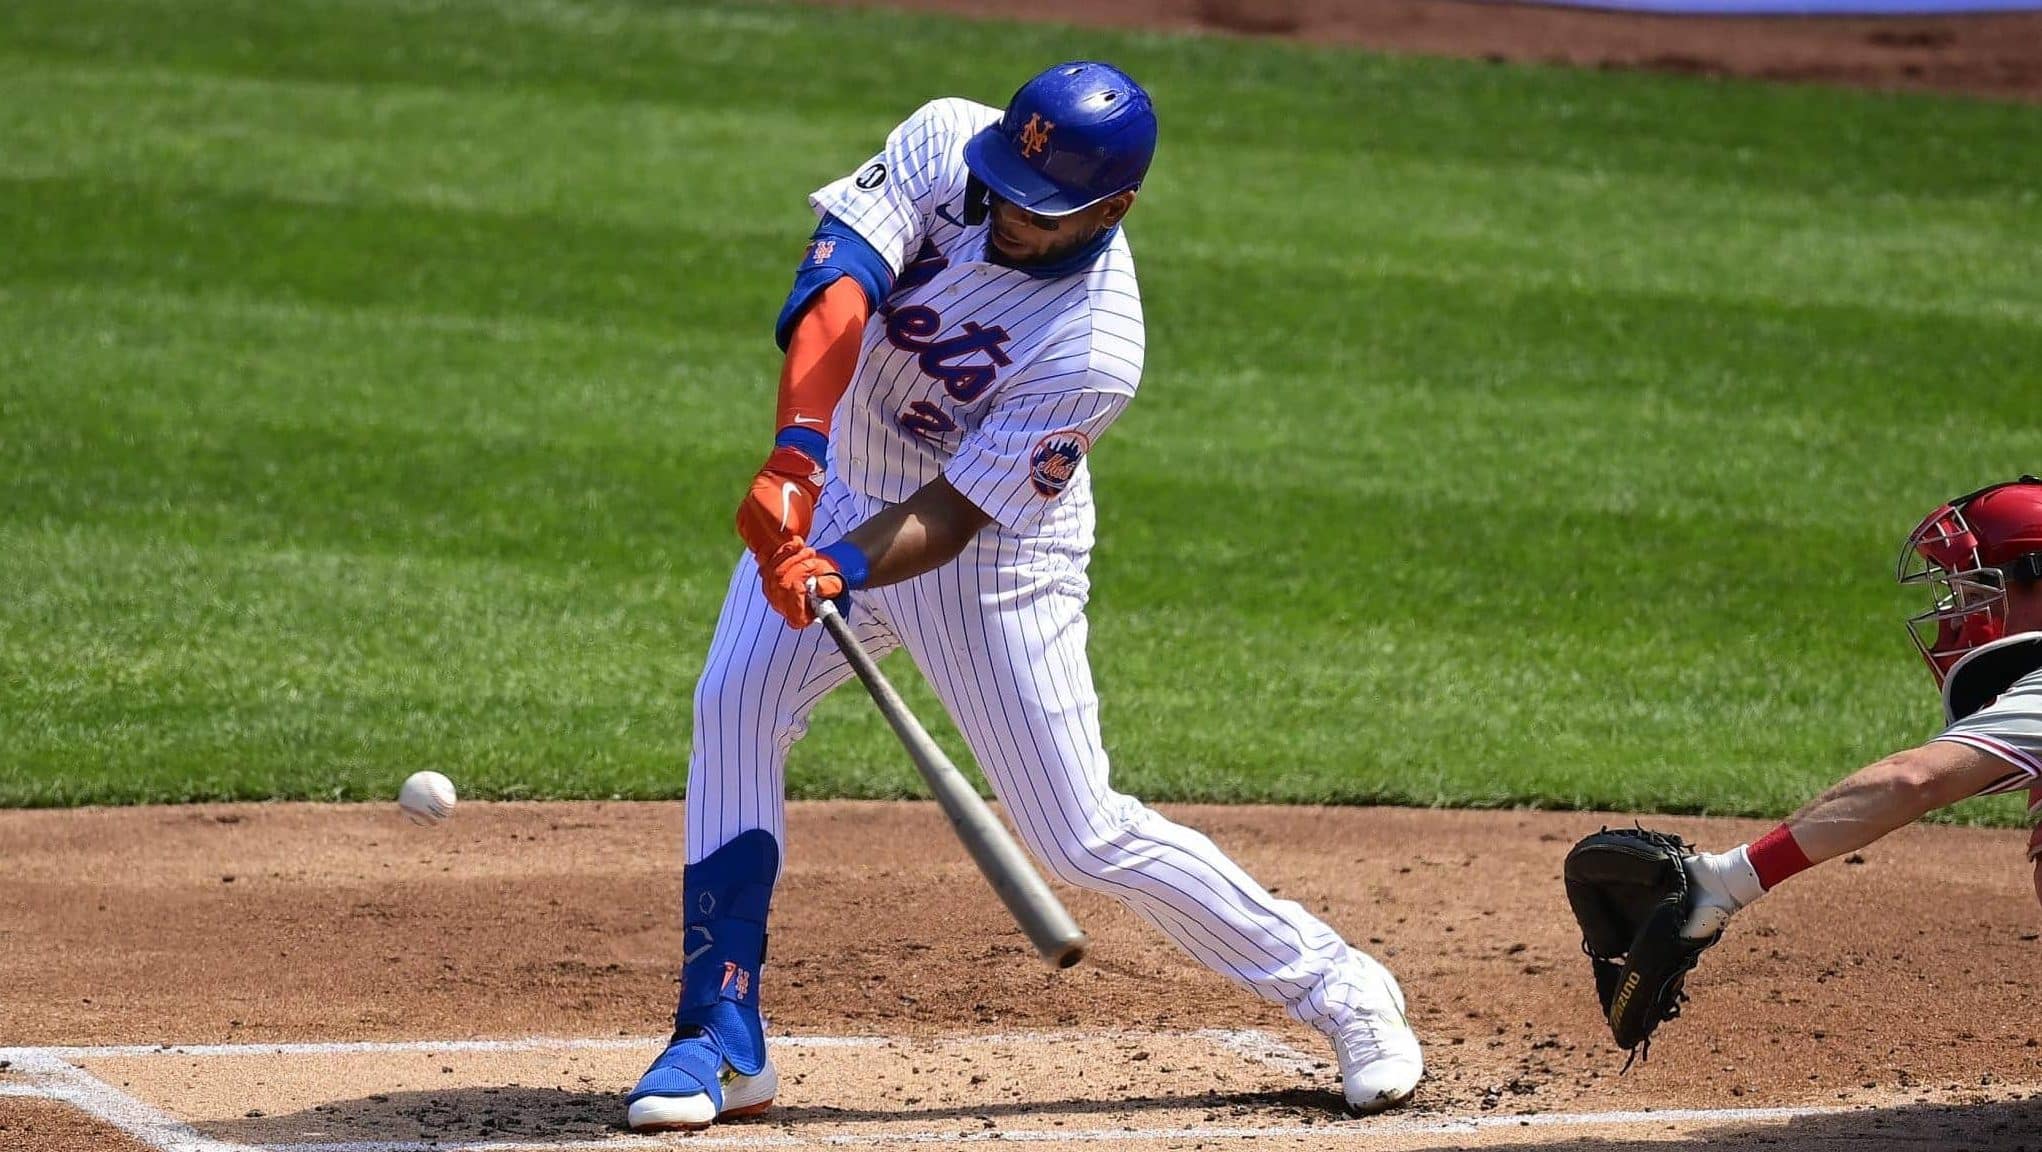 NEW YORK, NEW YORK - SEPTEMBER 06: Dominic Smith #2 of the New York Mets hits an RBI double against the Philadelphia Phillies during the first inning at Citi Field on September 06, 2020 in New York City.